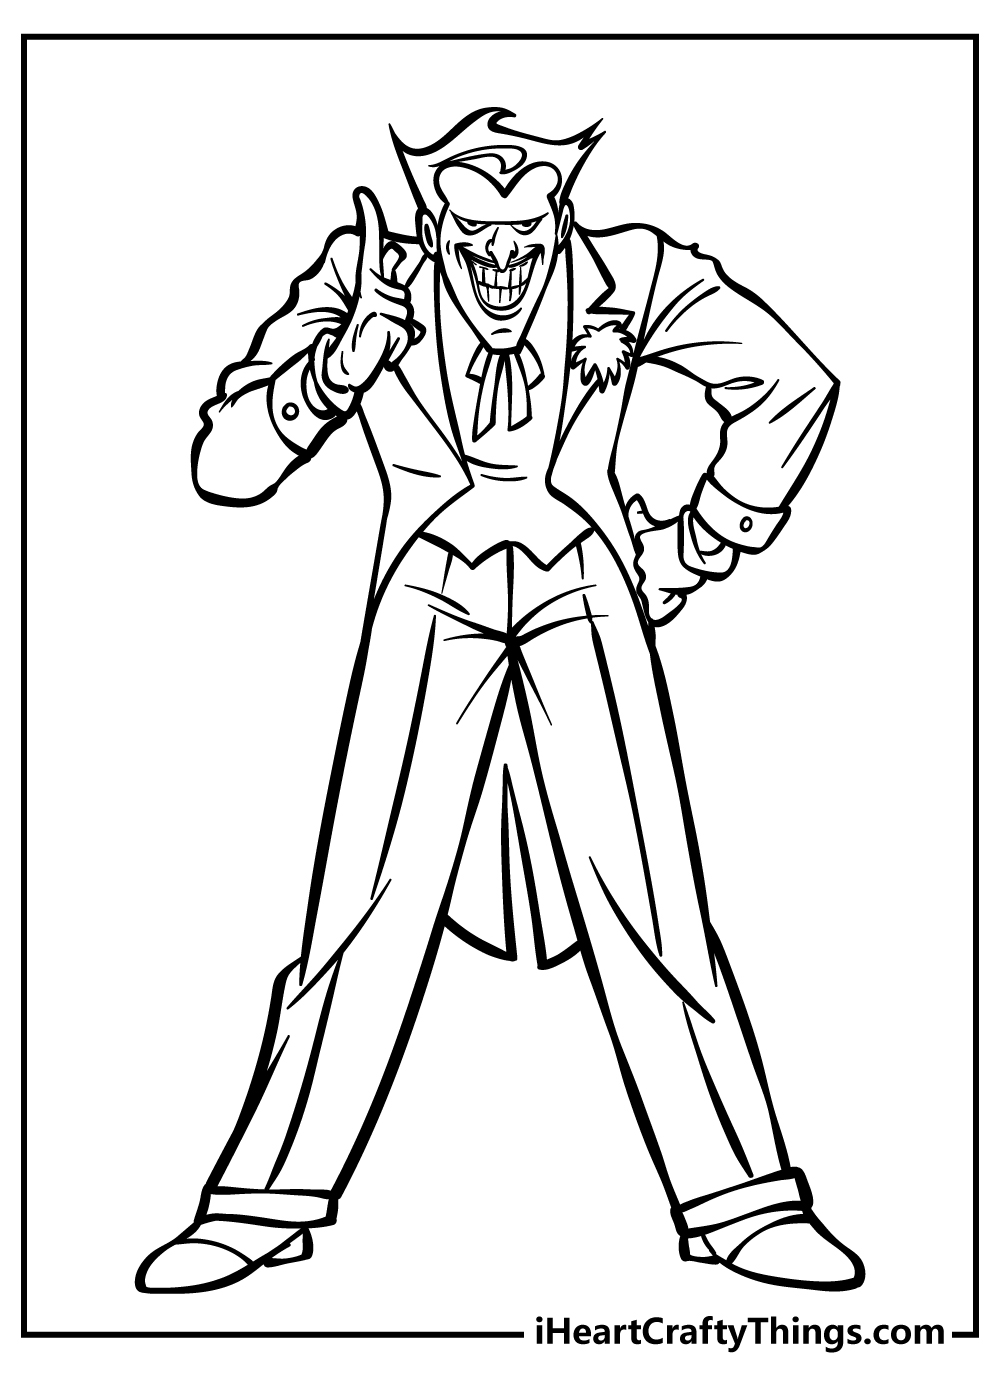 Joker Coloring Pages for preschoolers free printable